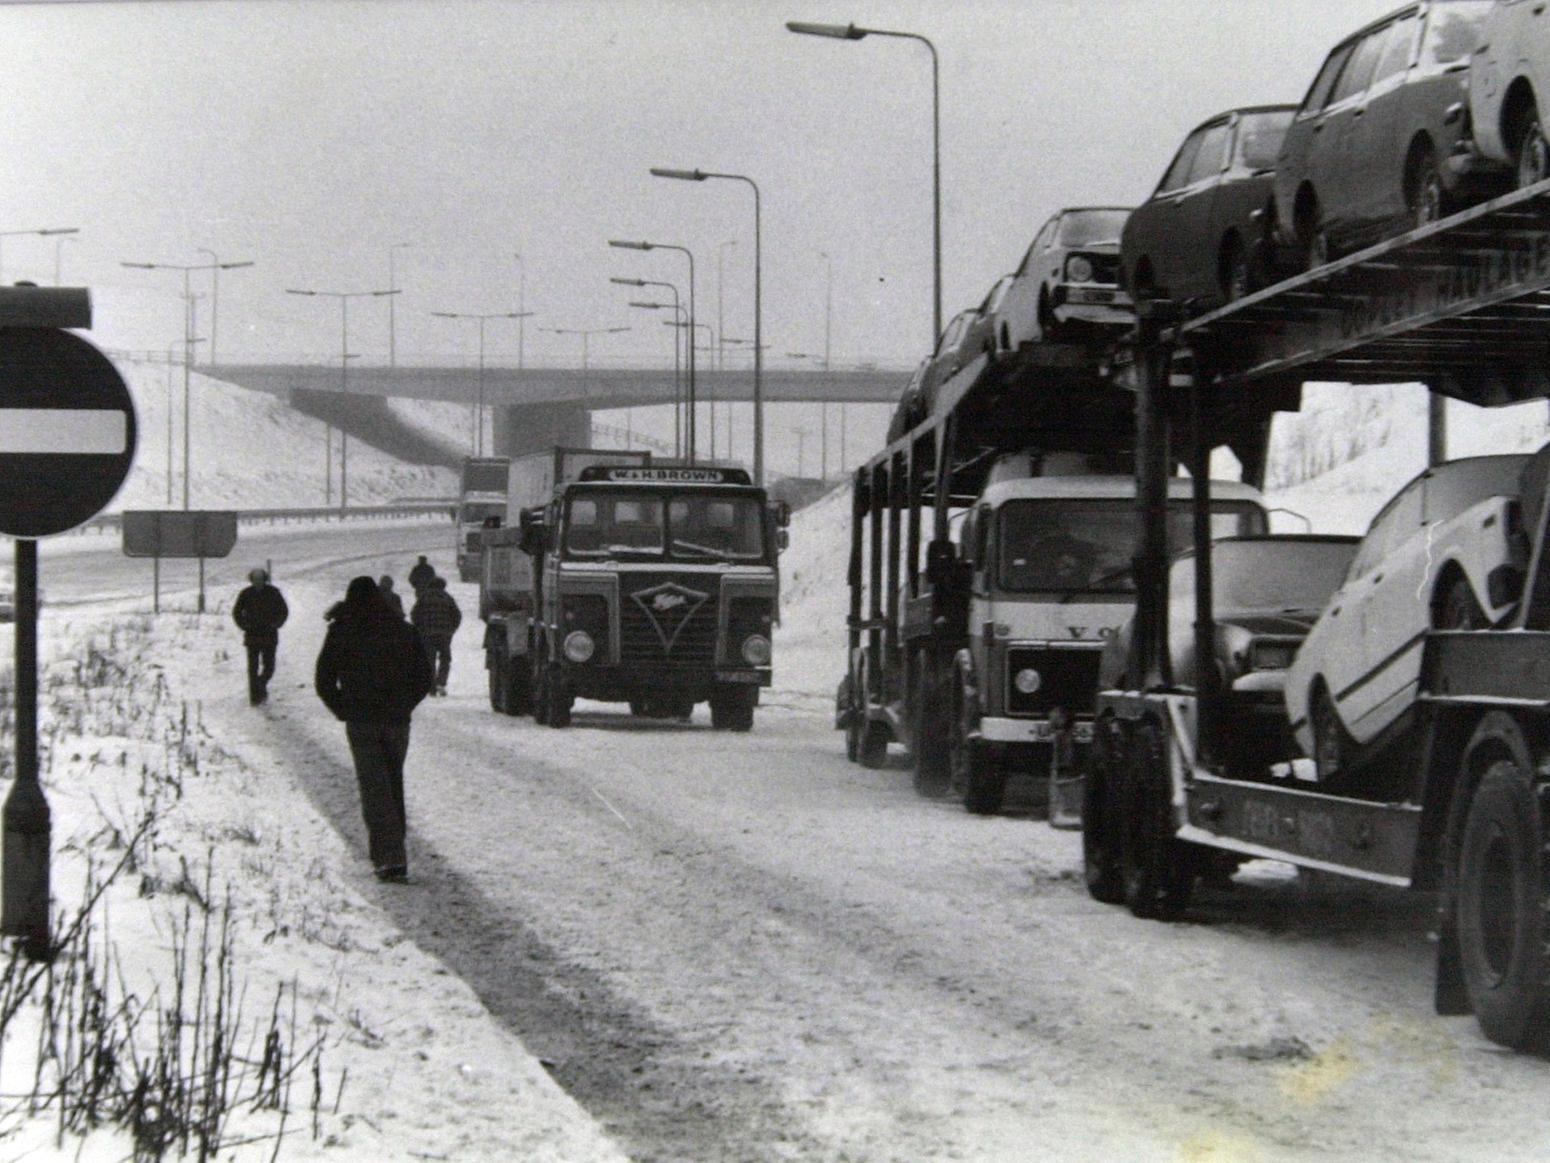 Is this M62 or the A64? Either way snow brought severe disruption at the end of the 1970s.